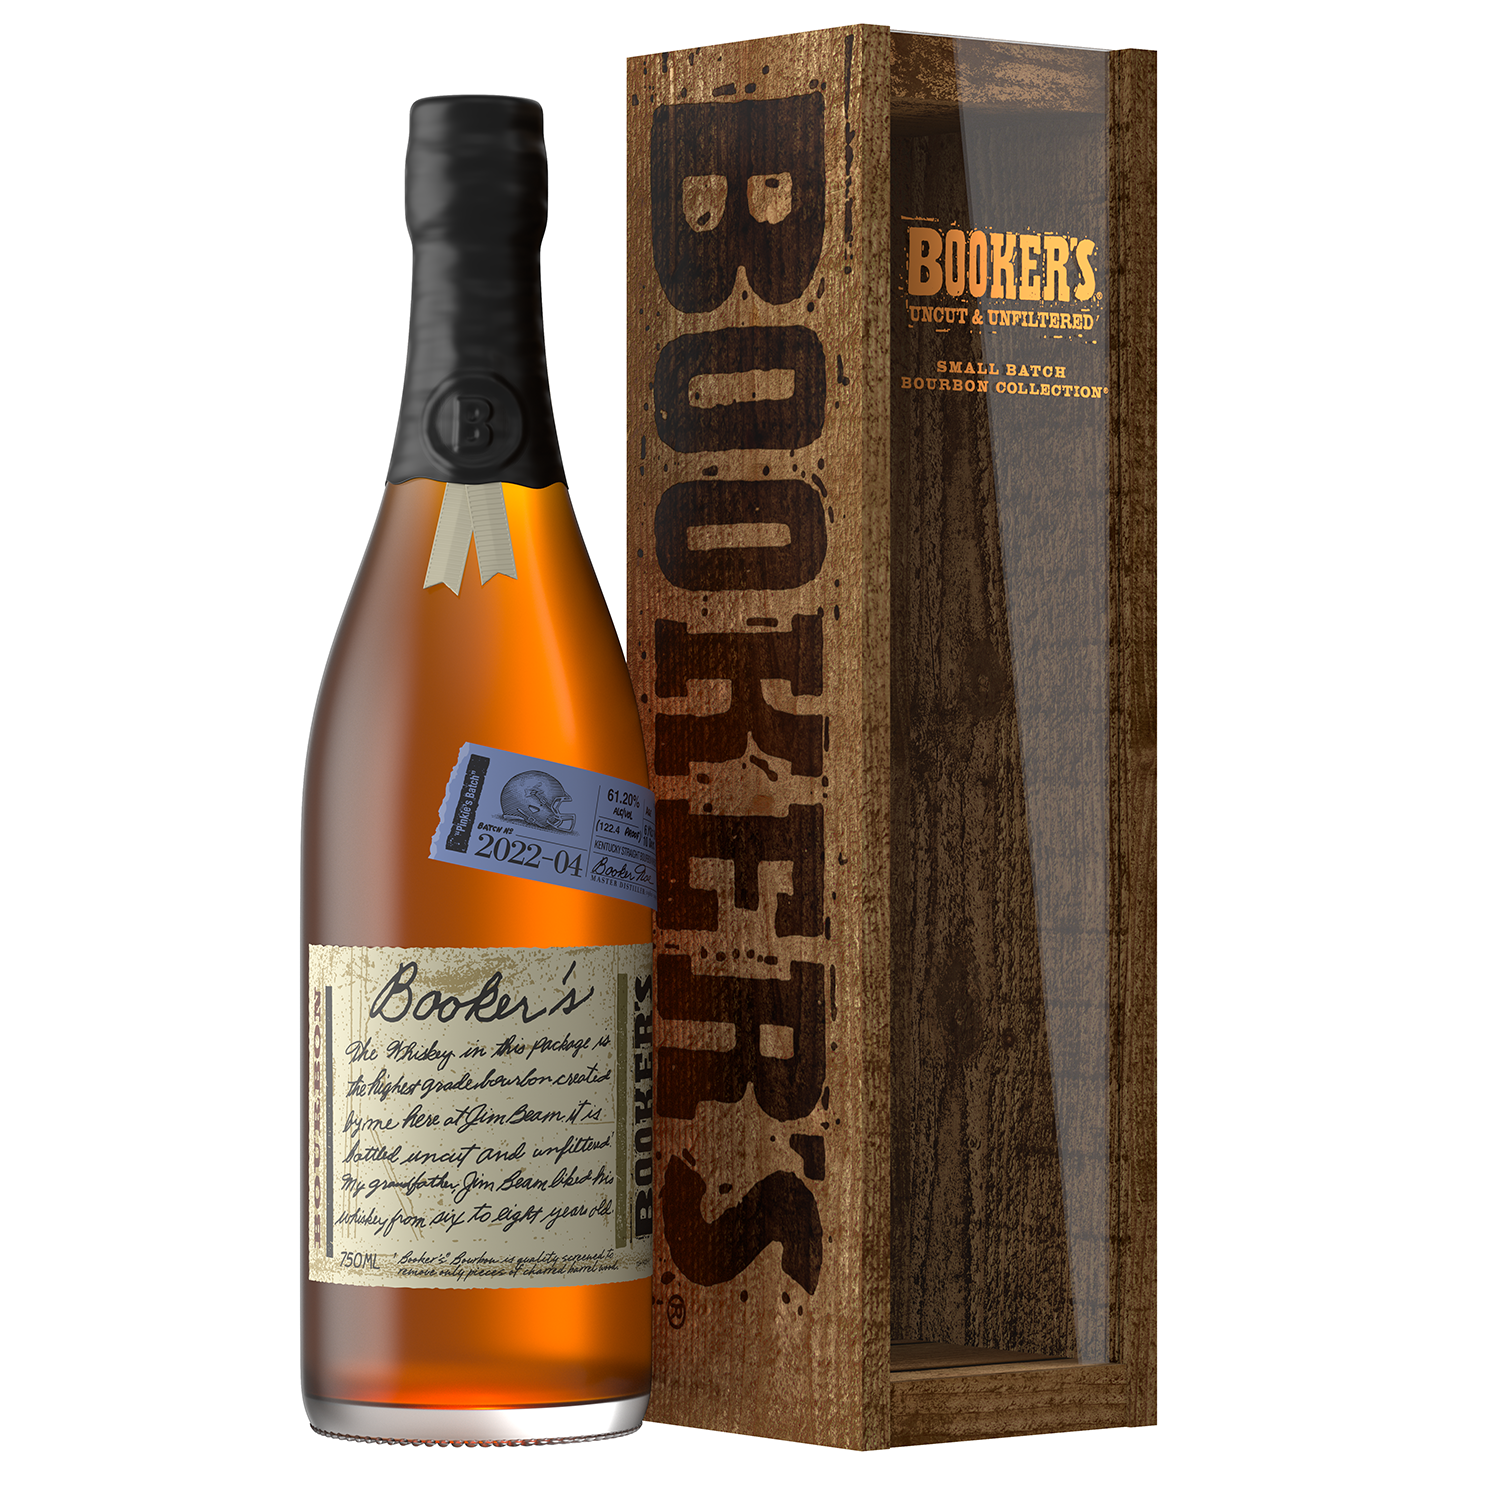 Booker’s “Pinkie’s Batch”, Perfect For Last Second Holiday Gift